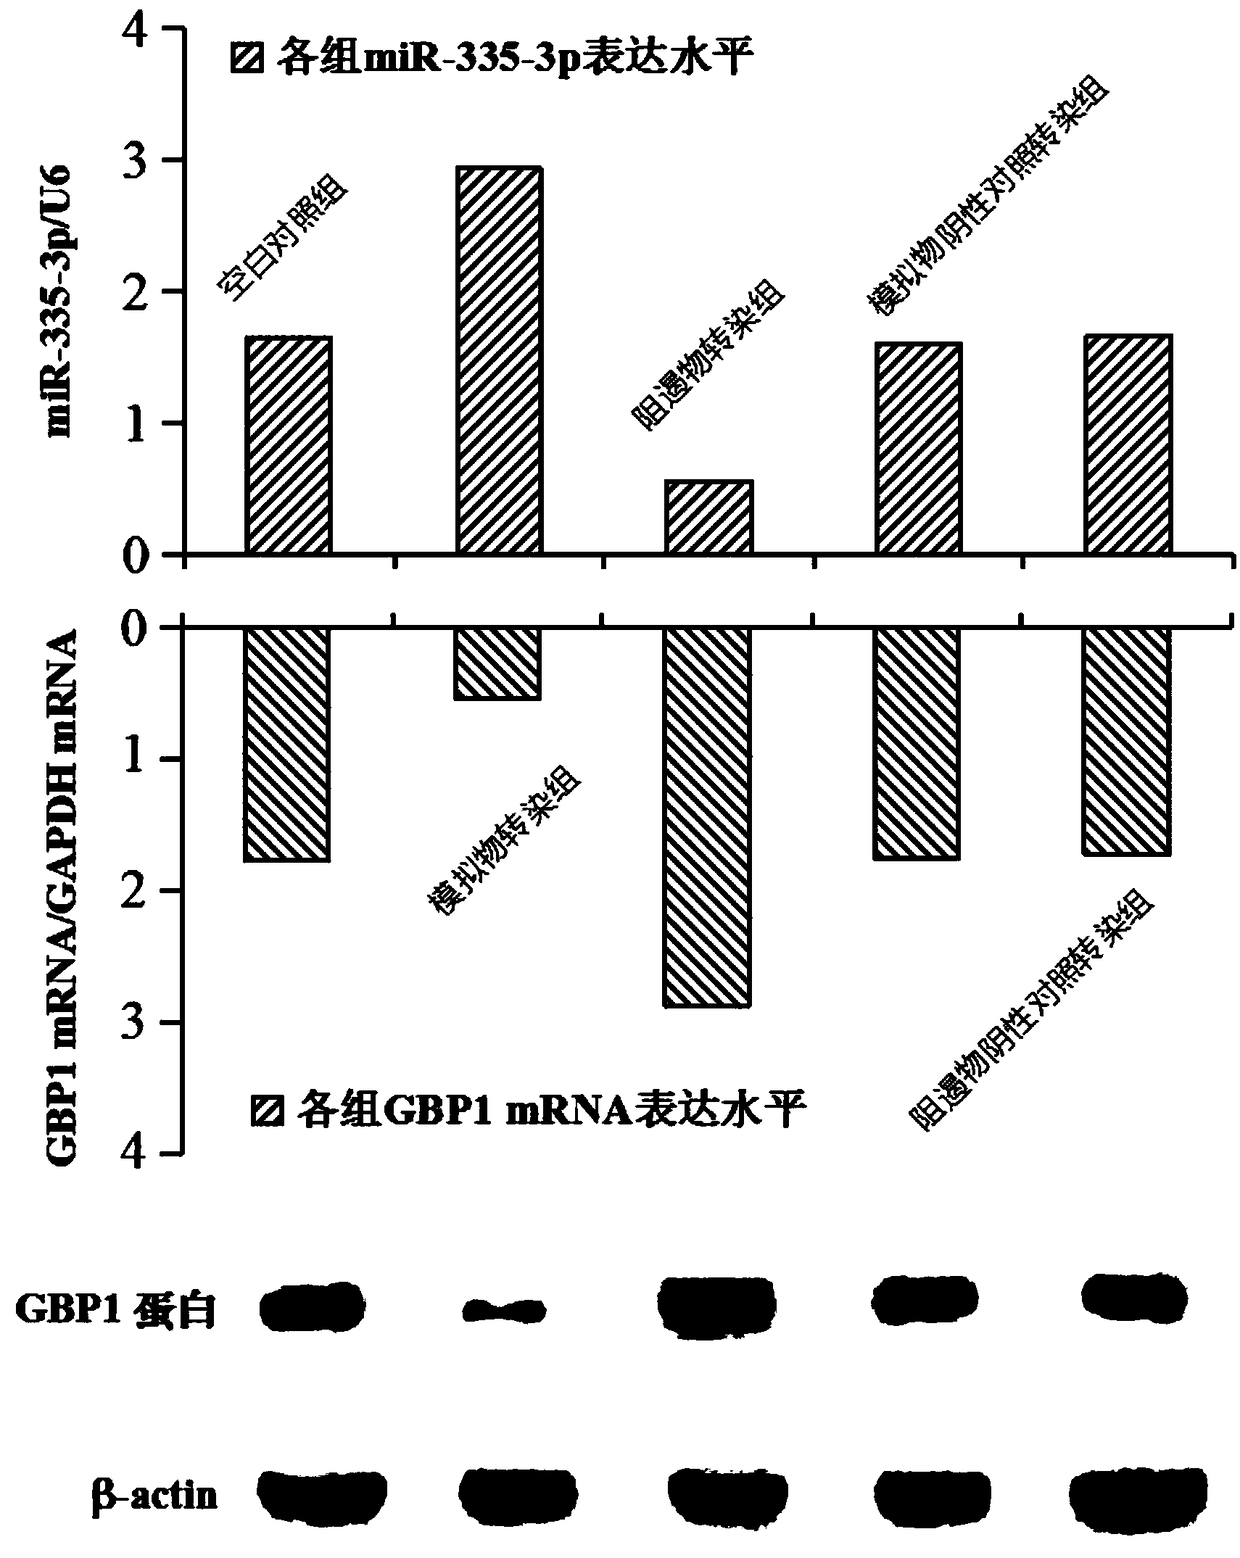 Application of gbp1 gene and its inhibitor in preparation of medicine for treating lung squamous cell carcinoma